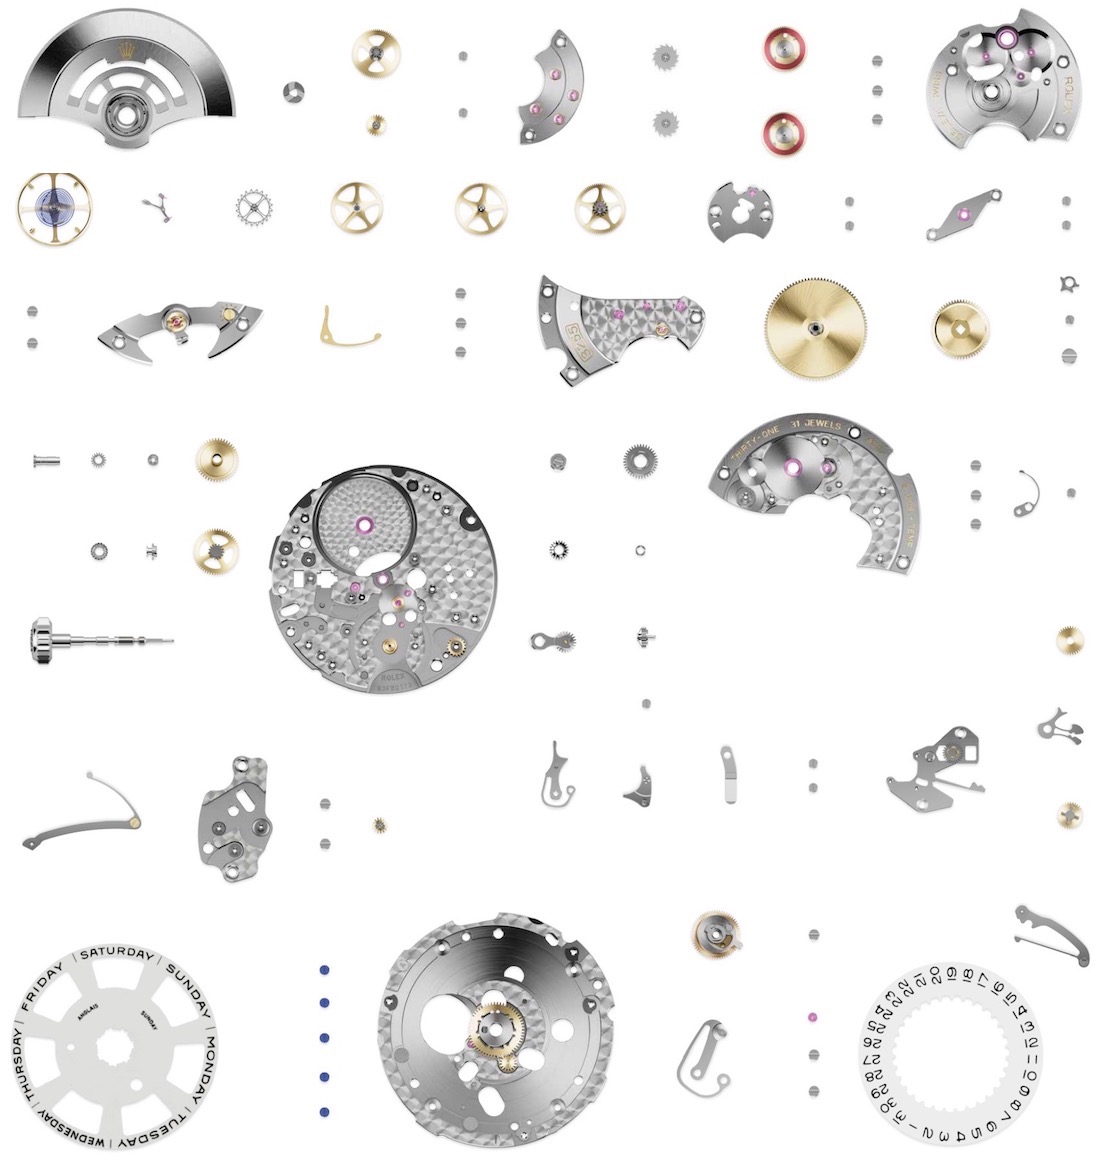 rolex-day-date-40-3255-movement-caliber-exploded-view-2